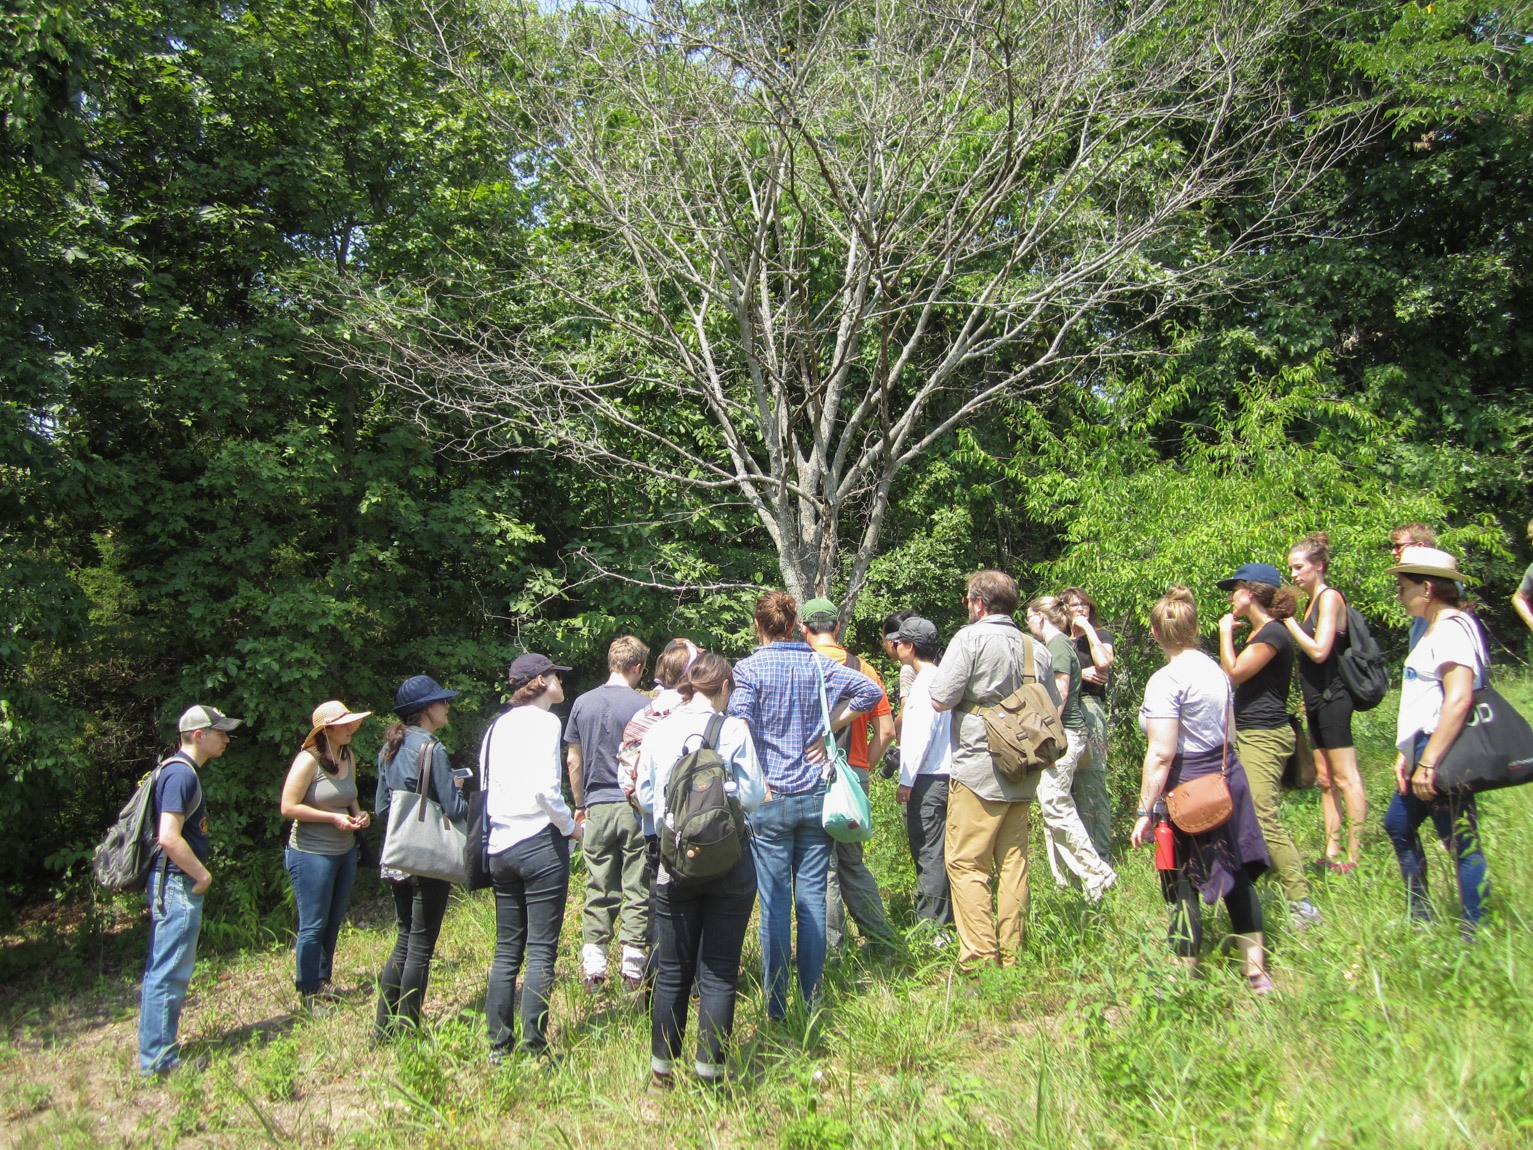 A group observing a presentation around a leafless tree in a forested area.